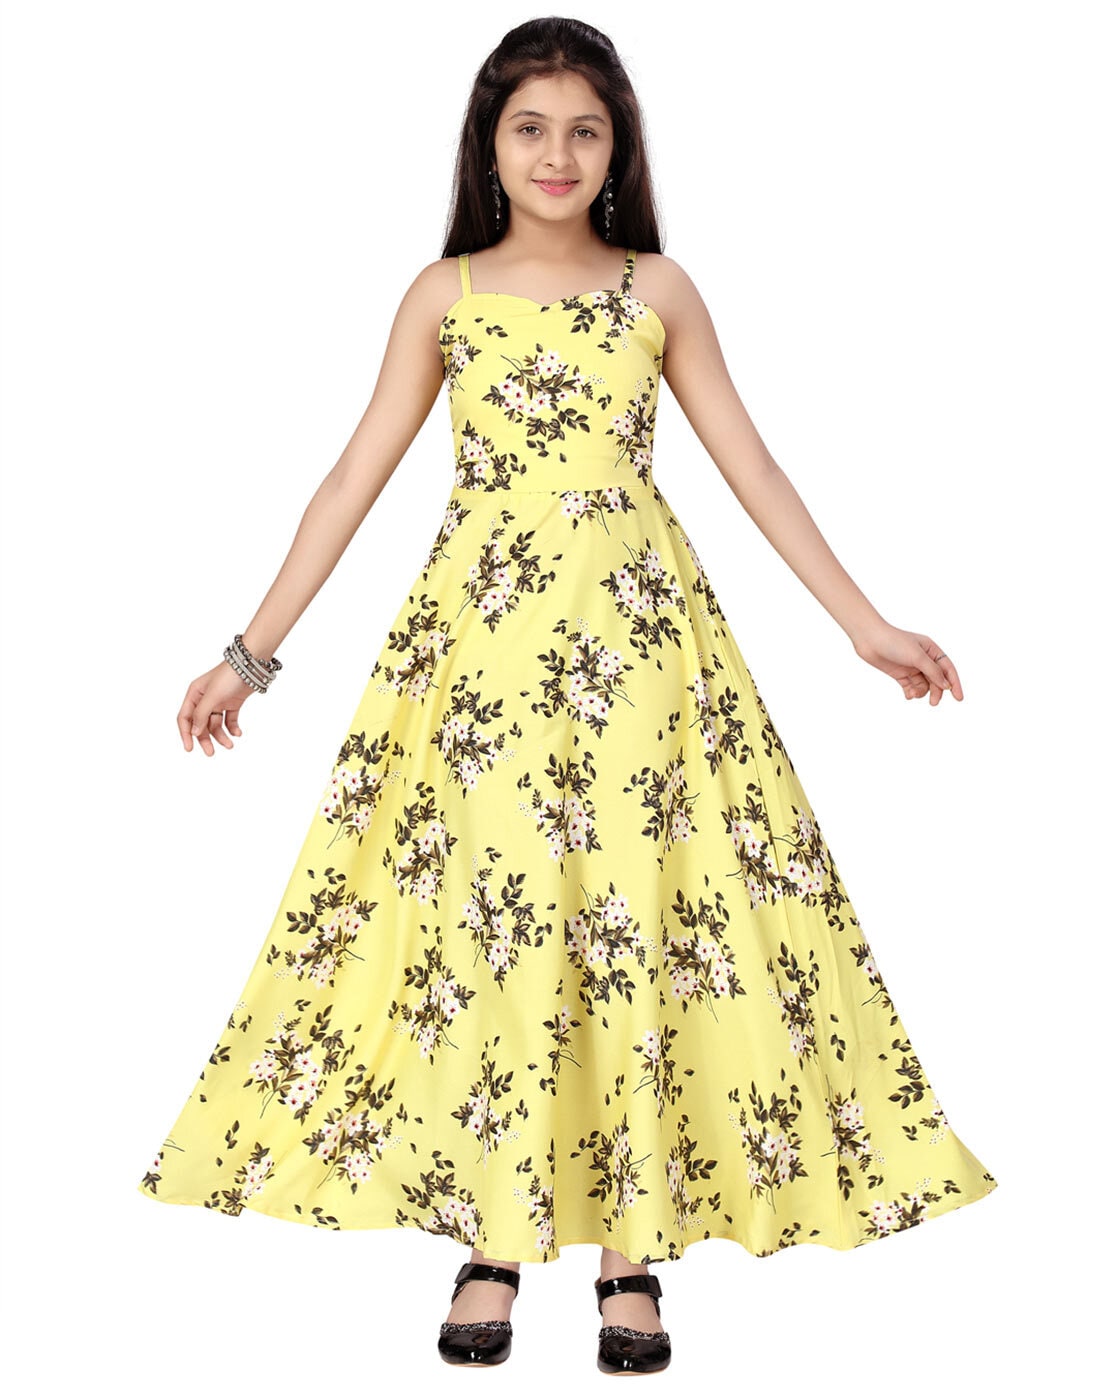 Details more than 144 snapdeal gown sale